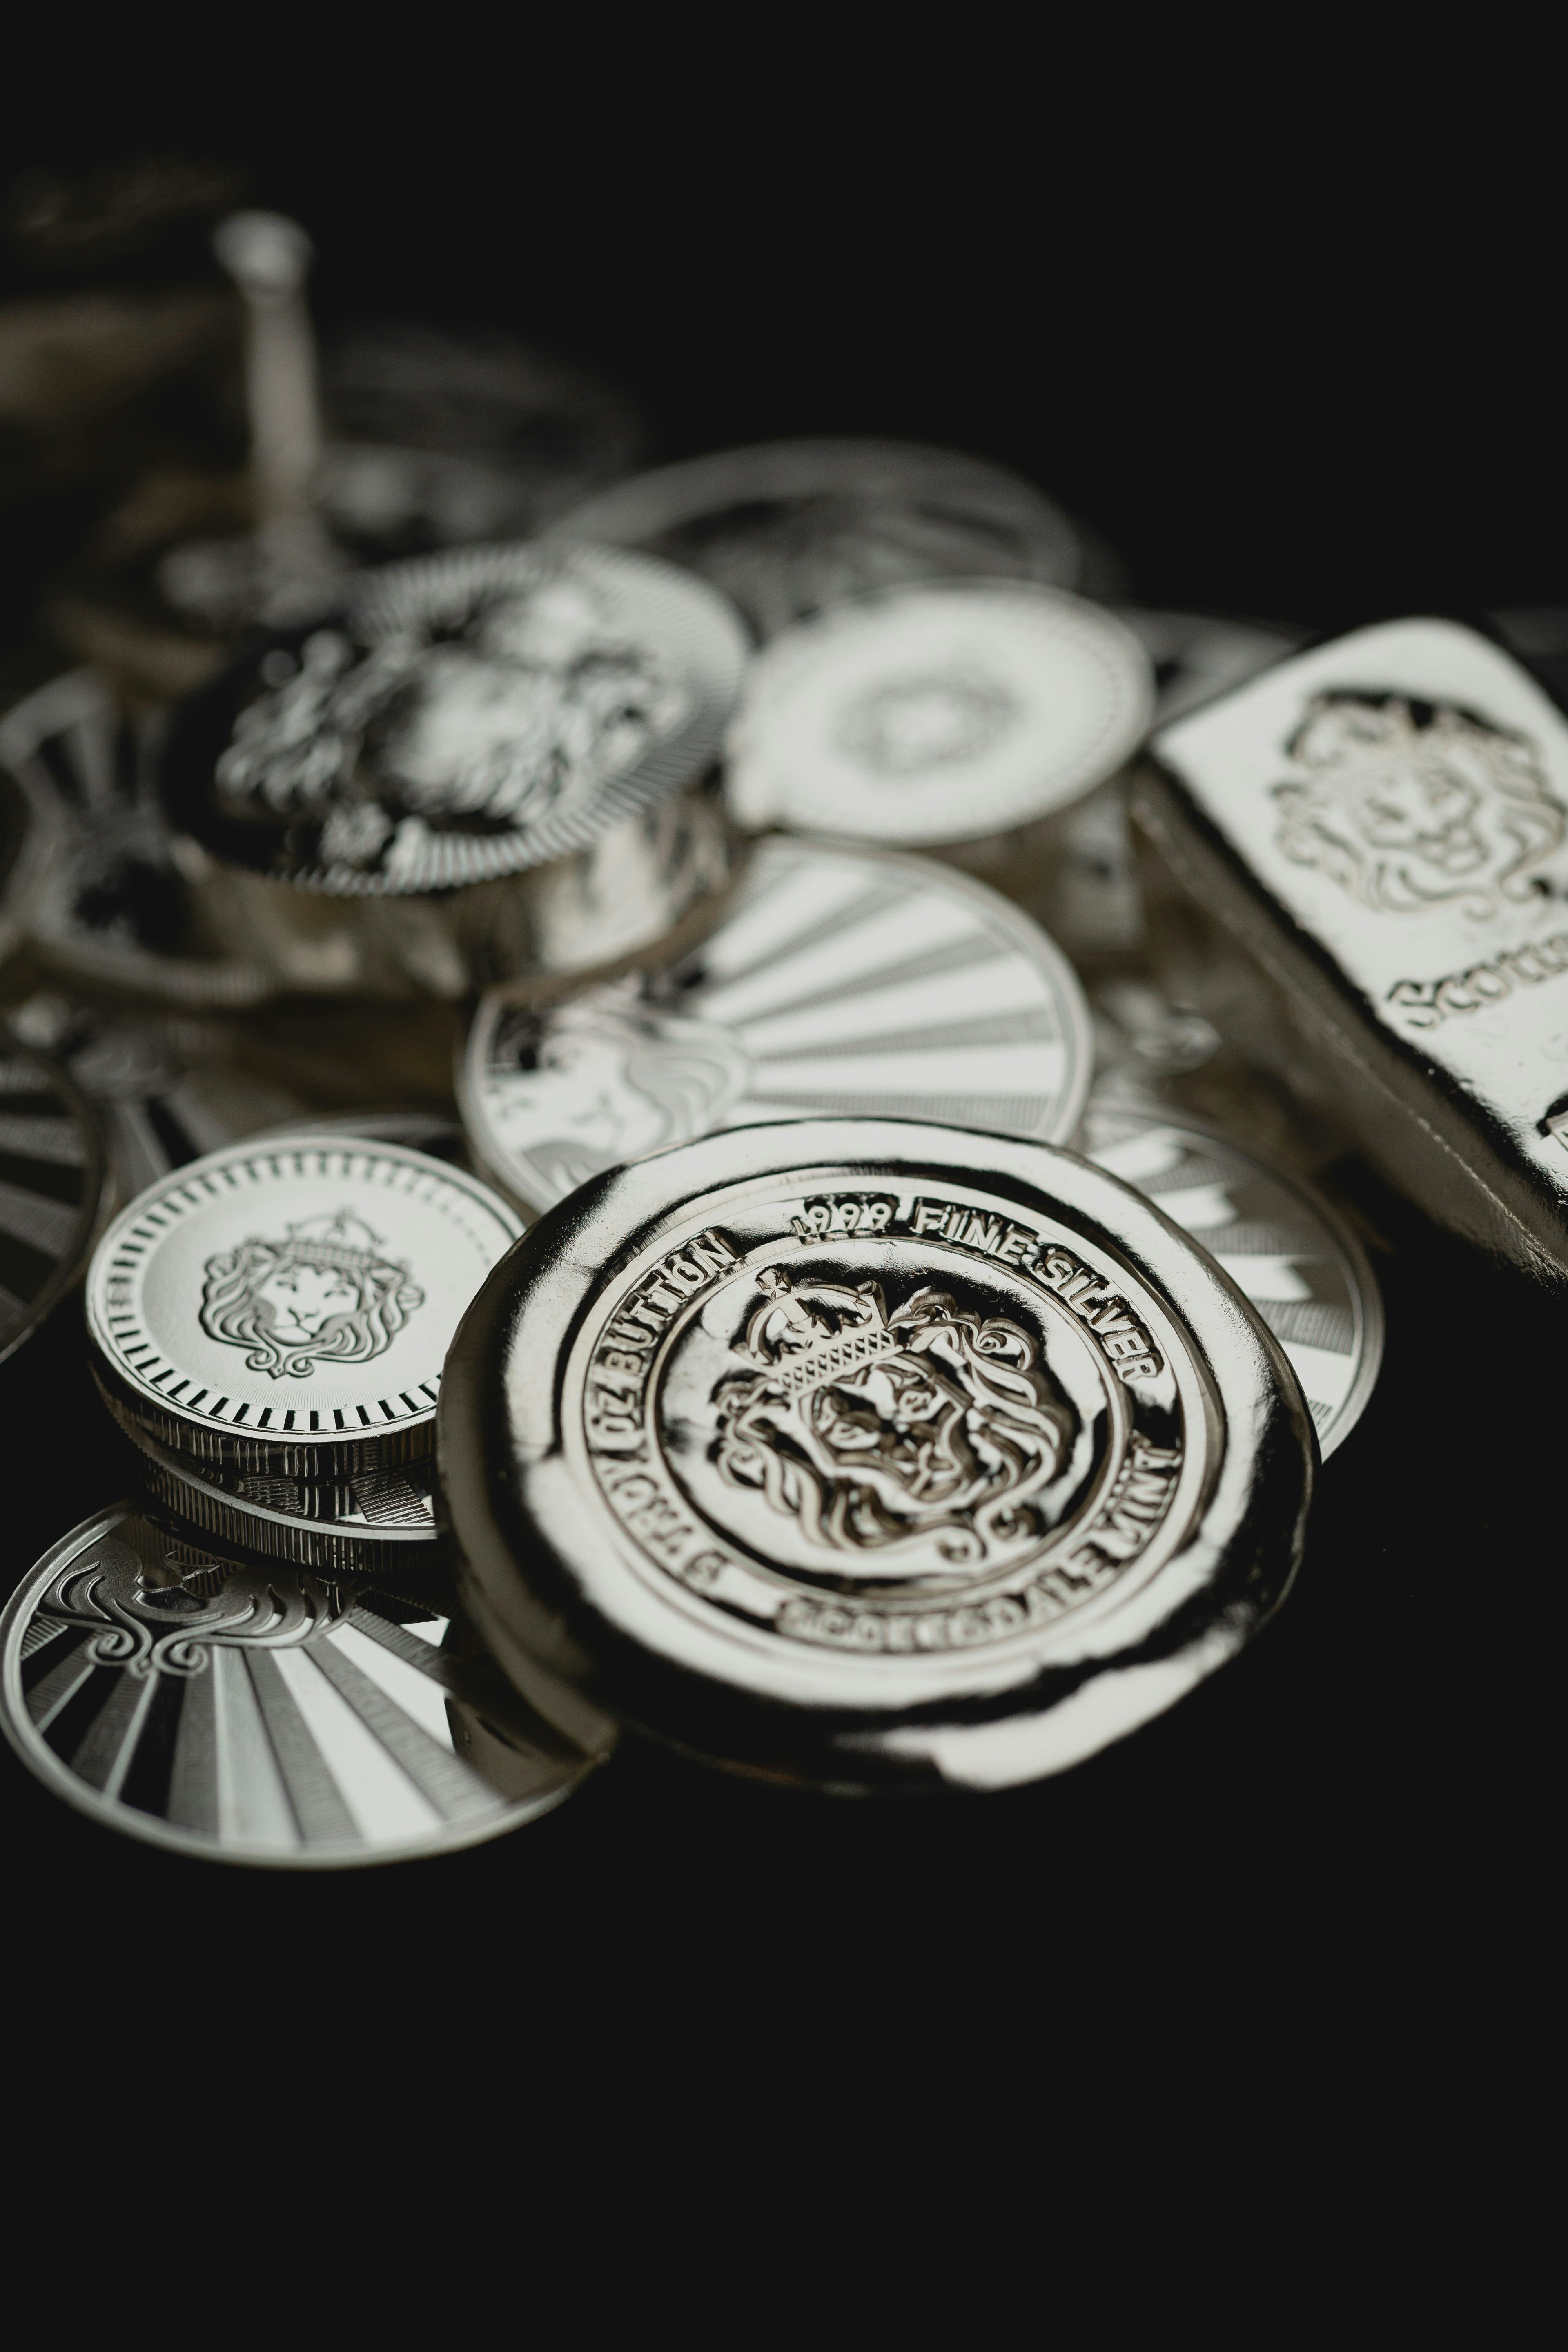 Scottsdale Silver stack of coins, rounds and bars sitting on a dark background. Please give a shoutout to Scottsdale Mint if able! Shop online for the most beautiful bullion at ScottsdaleMint.com!